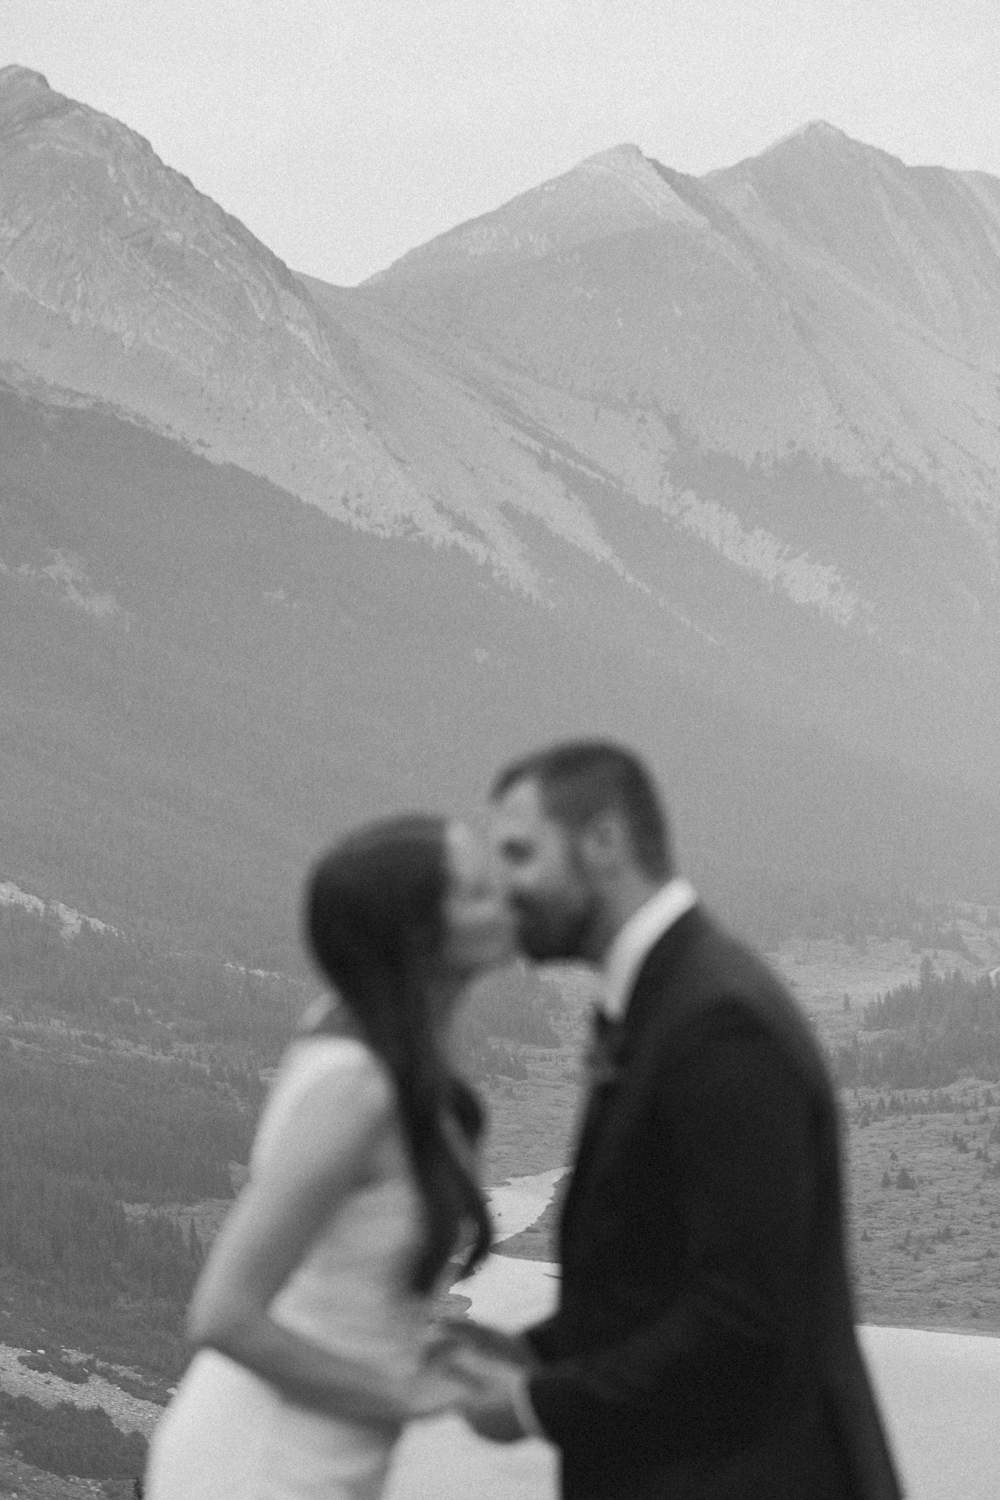 Banff Helicopter Elopement in the Rocky Mountains Banff Elopement Photographer. A private and romantic wedding. 